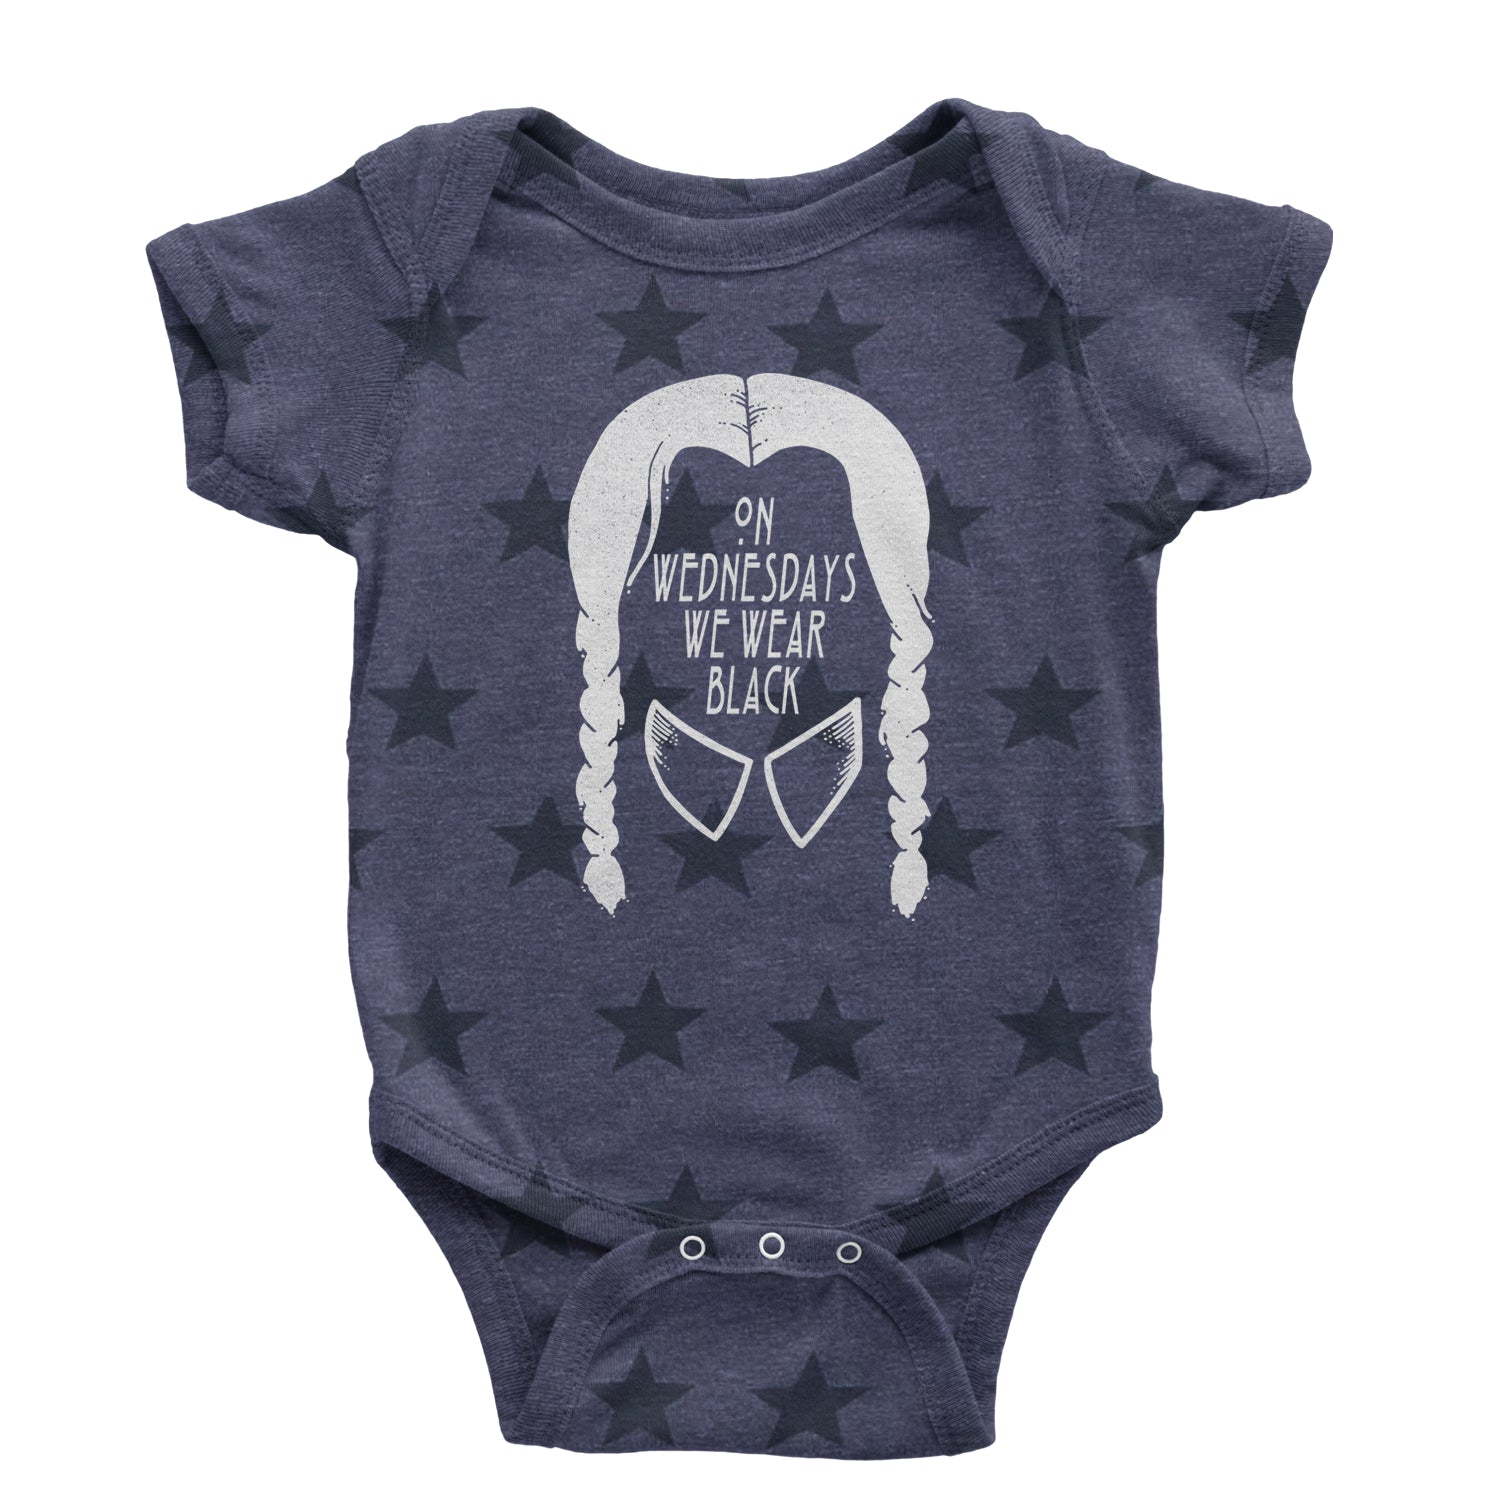 On Wednesdays, We Wear Black Infant One-Piece Romper Bodysuit and Toddler T-shirt addams, family, gomez, morticia, pugsly, ricci, Wednesday by Expression Tees